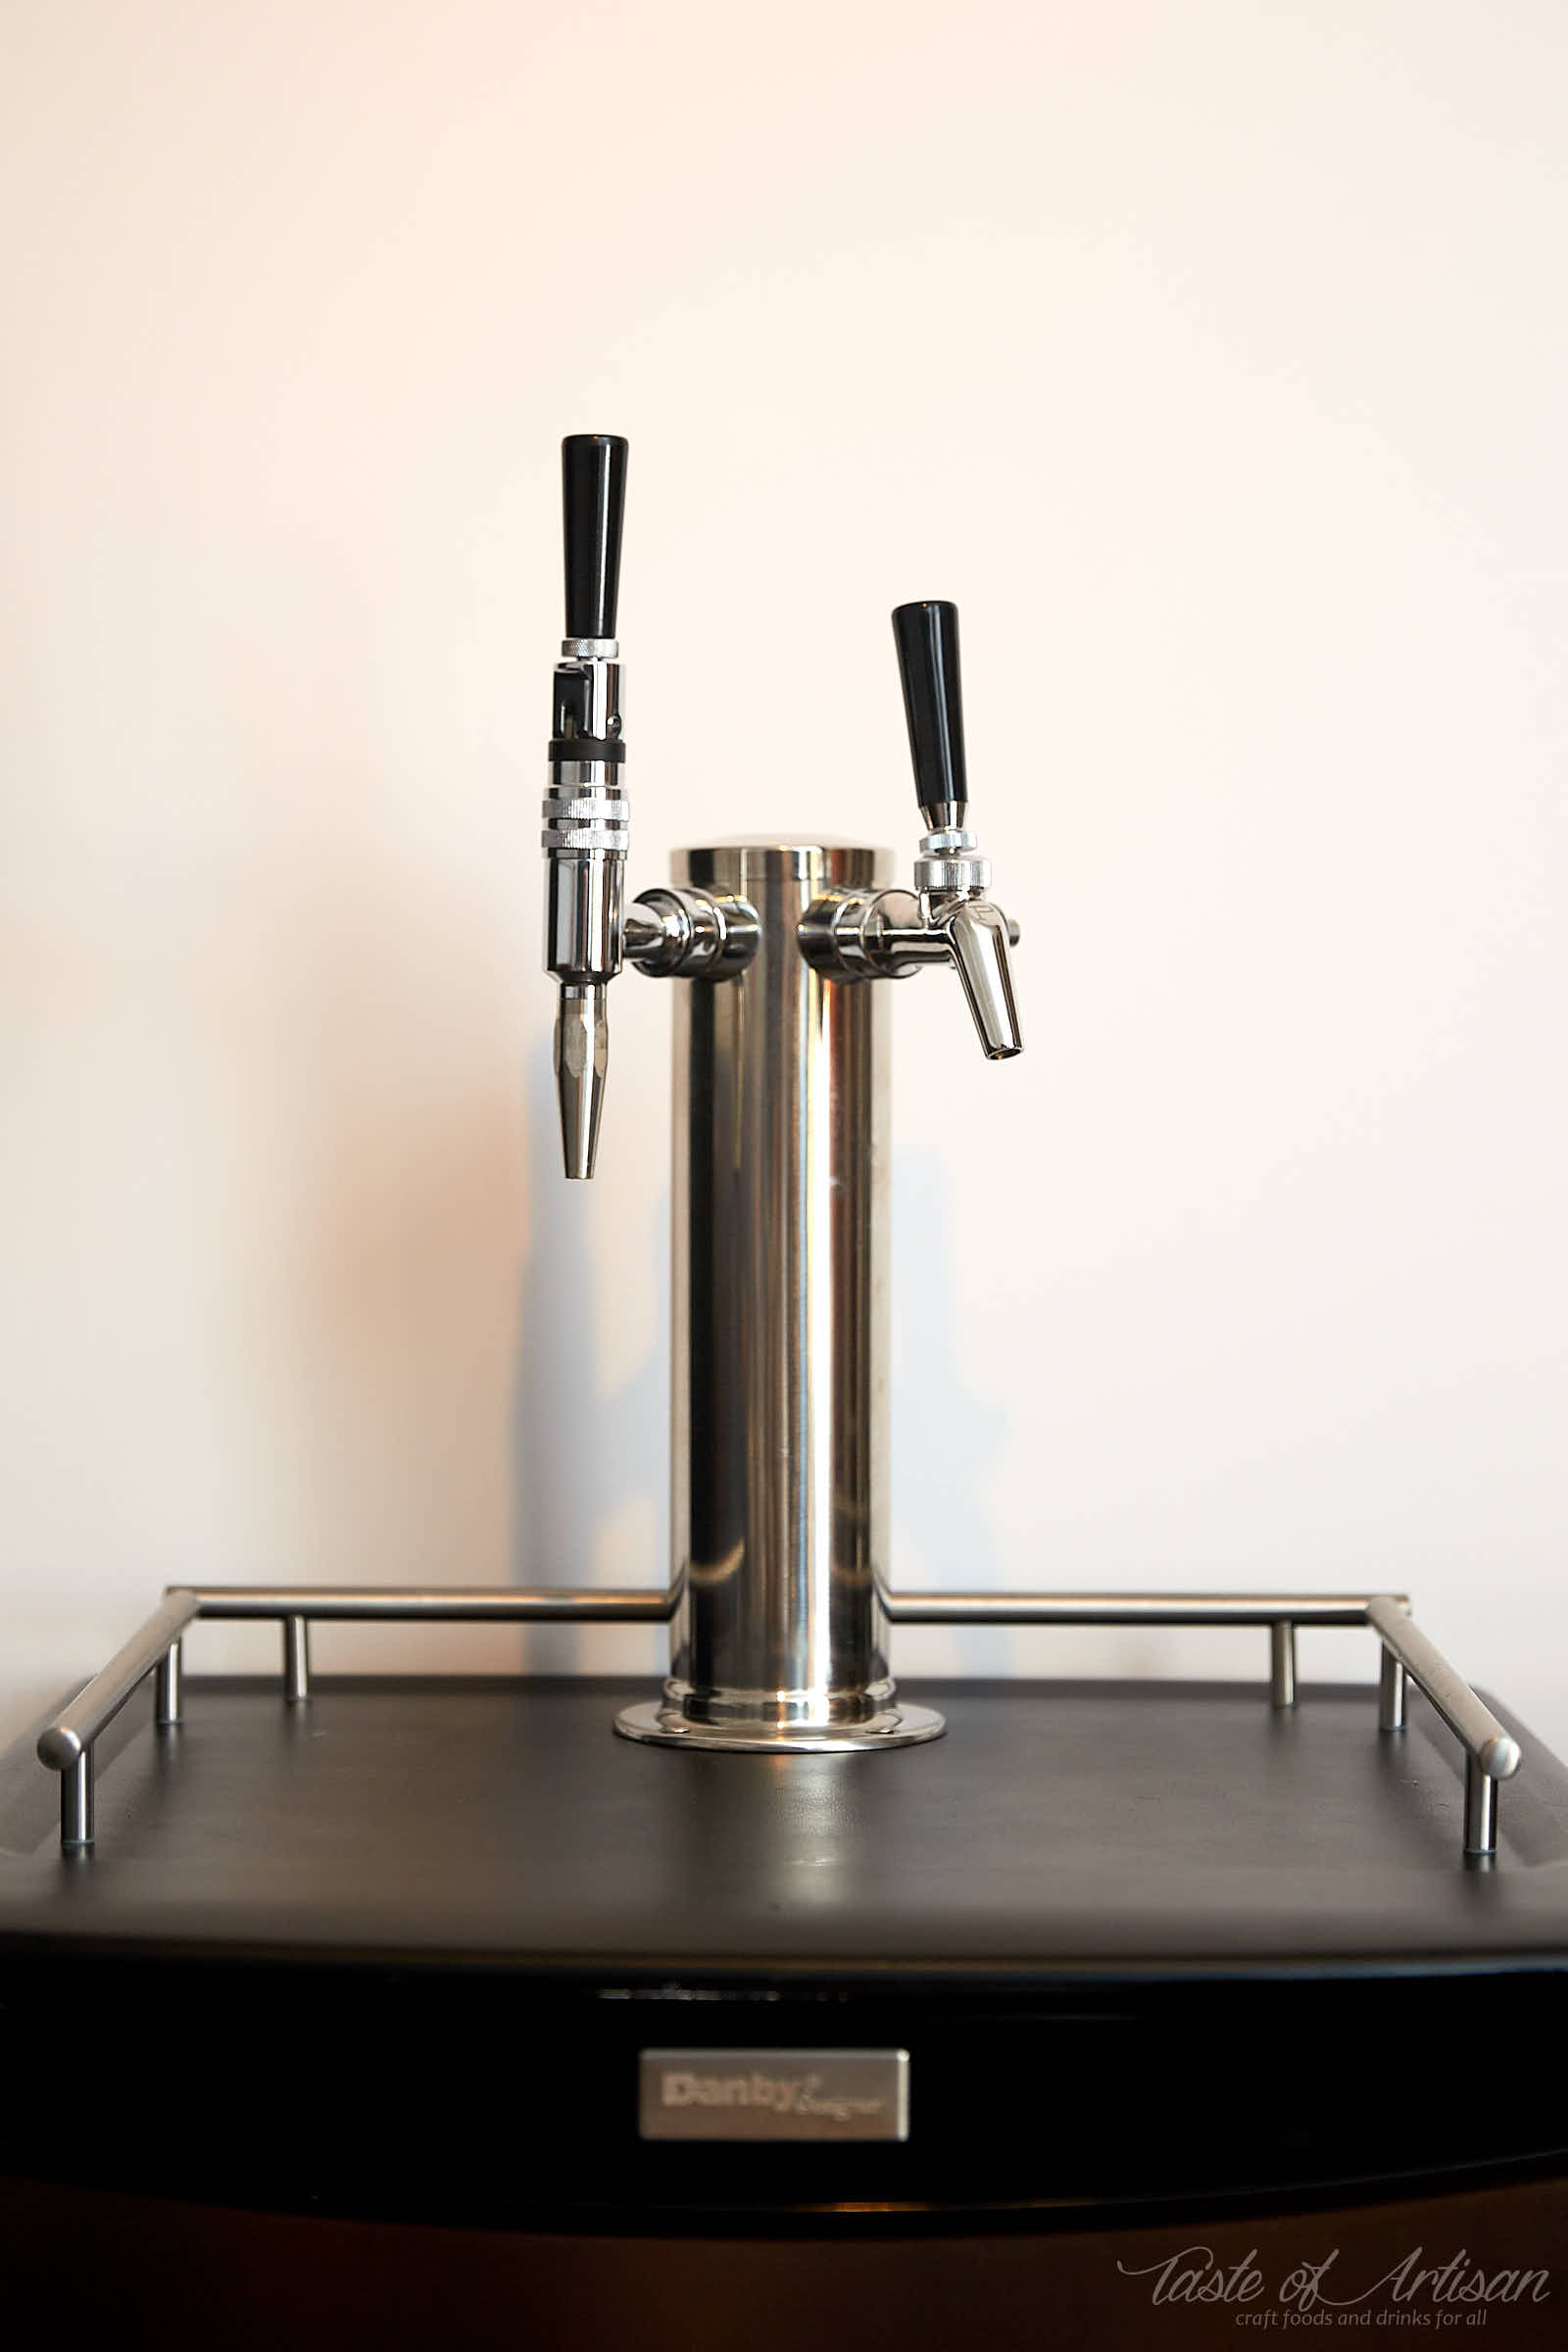 A detailed kegerator build guide. All you need is a bar fridge and a few kegerator parts. All you need to know on how to build a kegerator. | Taste of Artisan